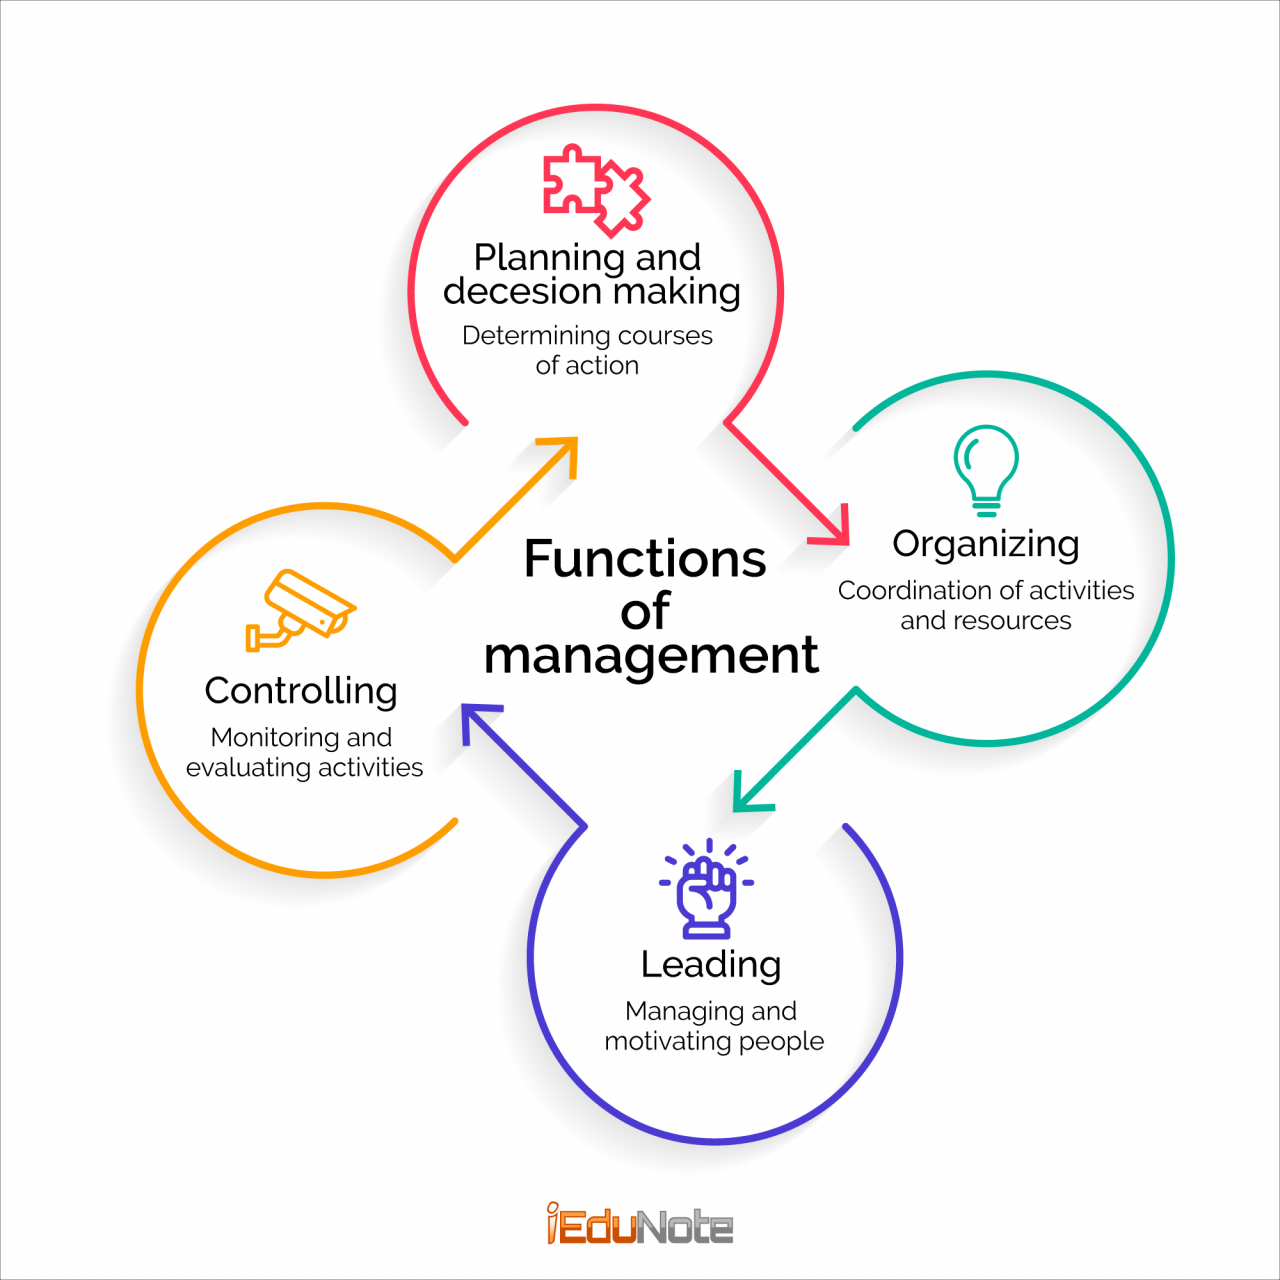 Benefits of management in an organization